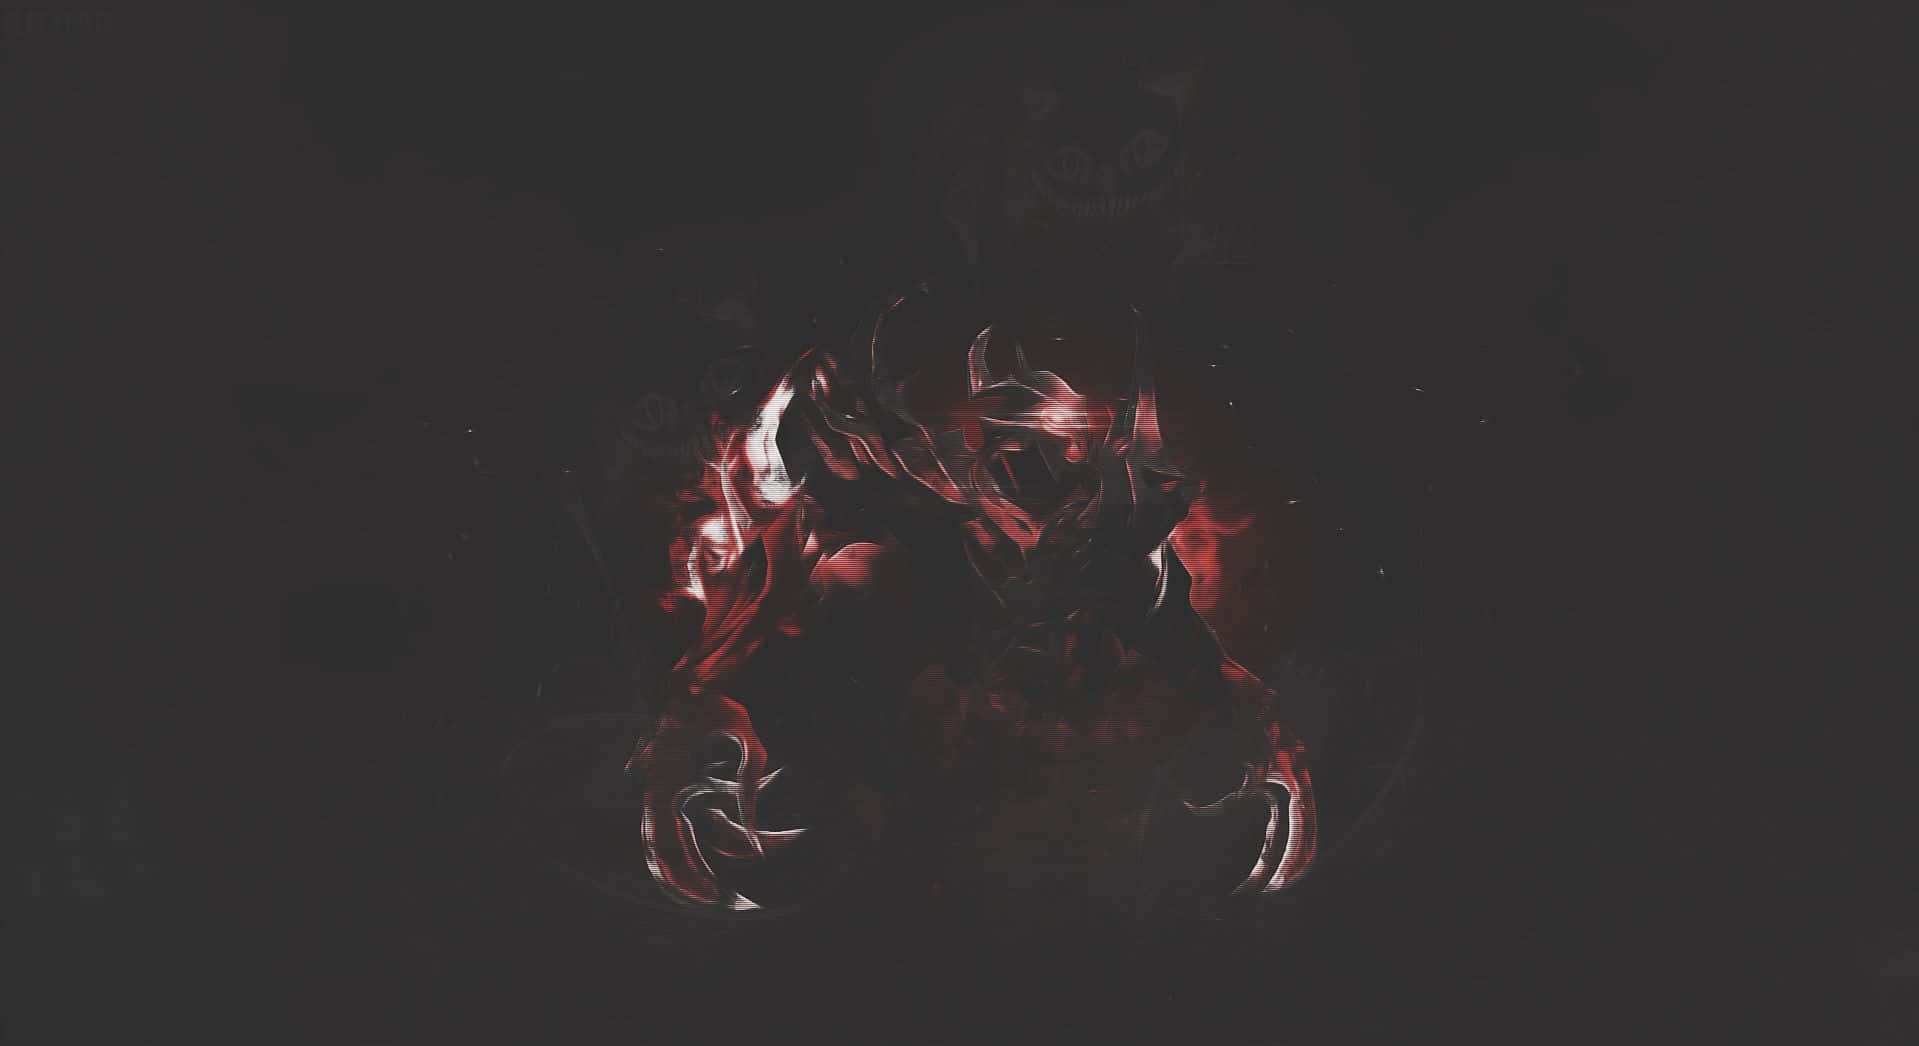 Shadow Fiend, Master of Souls, dominating the battlefield. Wallpaper